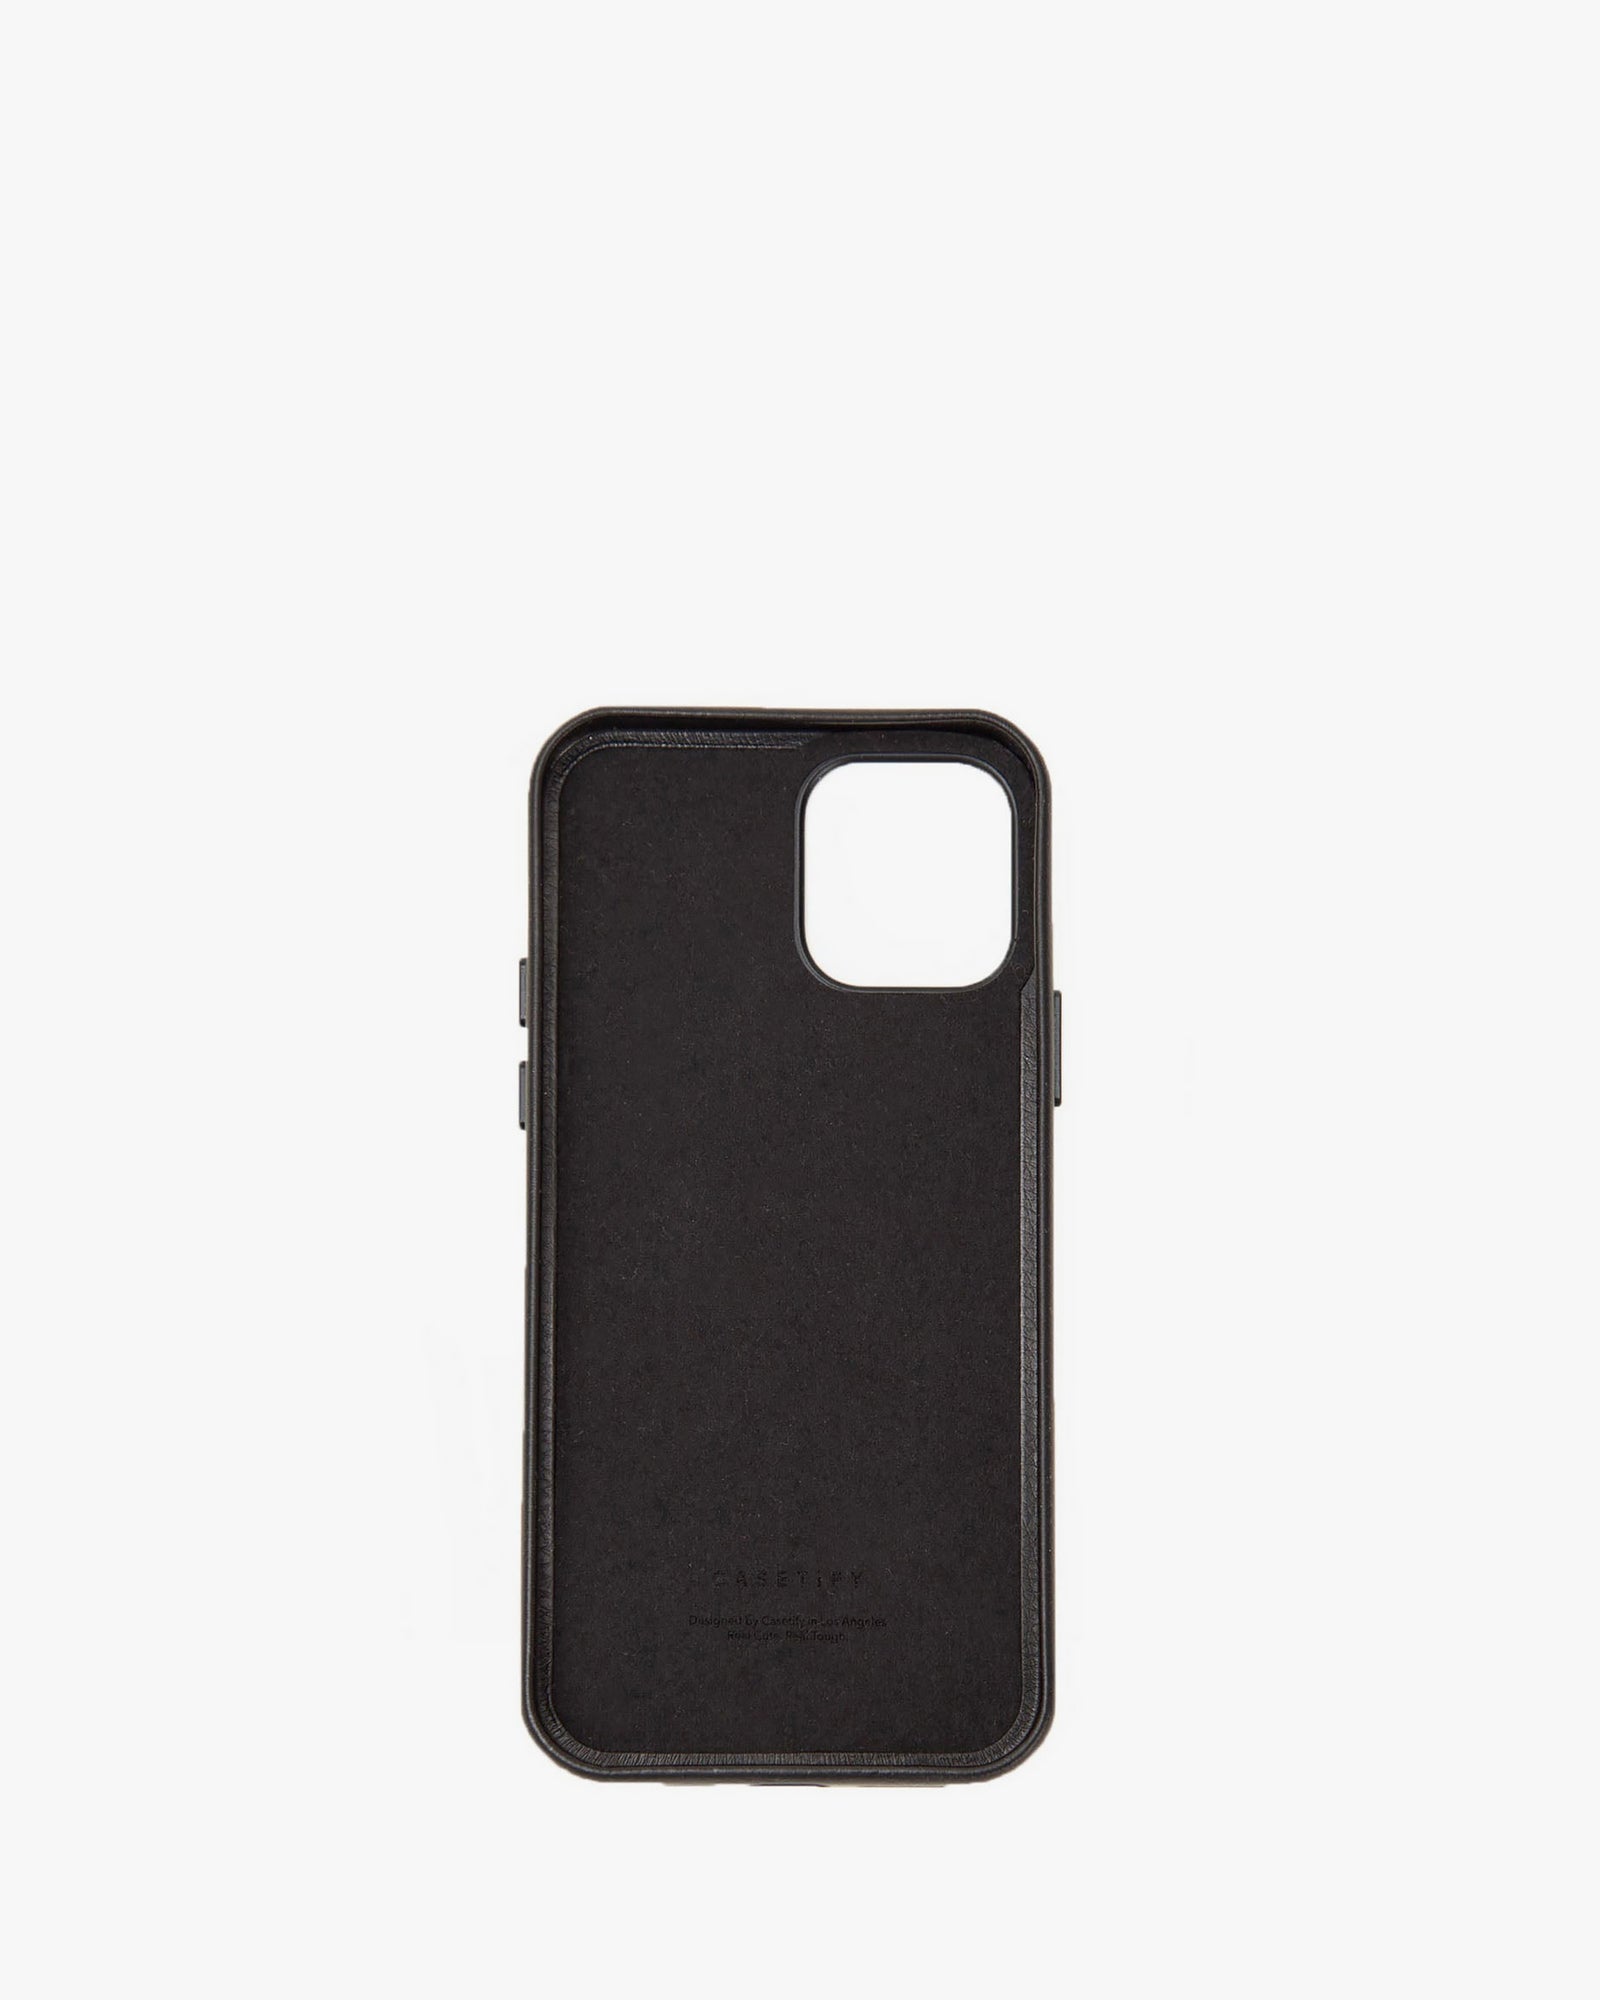 interior of the Black Oui Leather iPhone Case